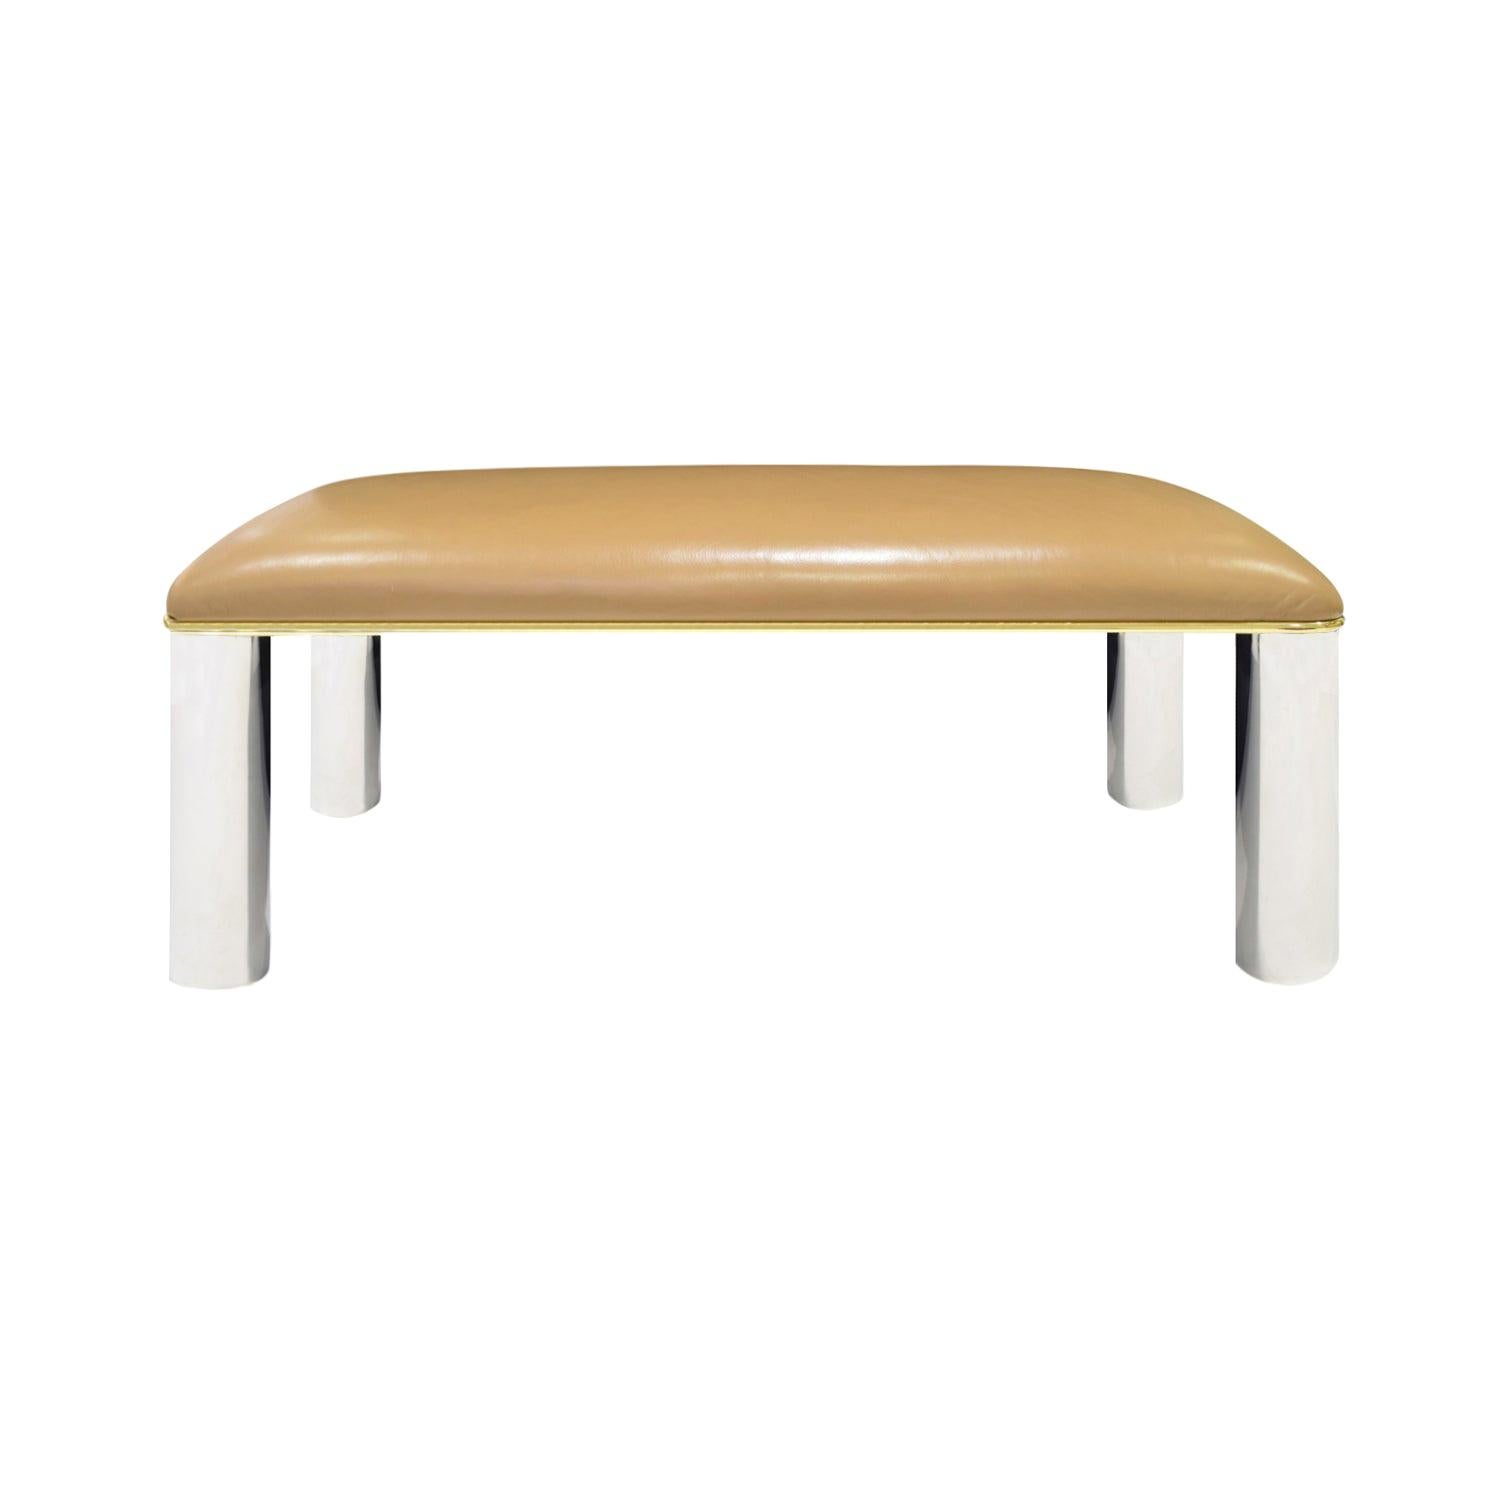 Karl Springer Bench in Polished Stainless Steel and Brass, 1980s